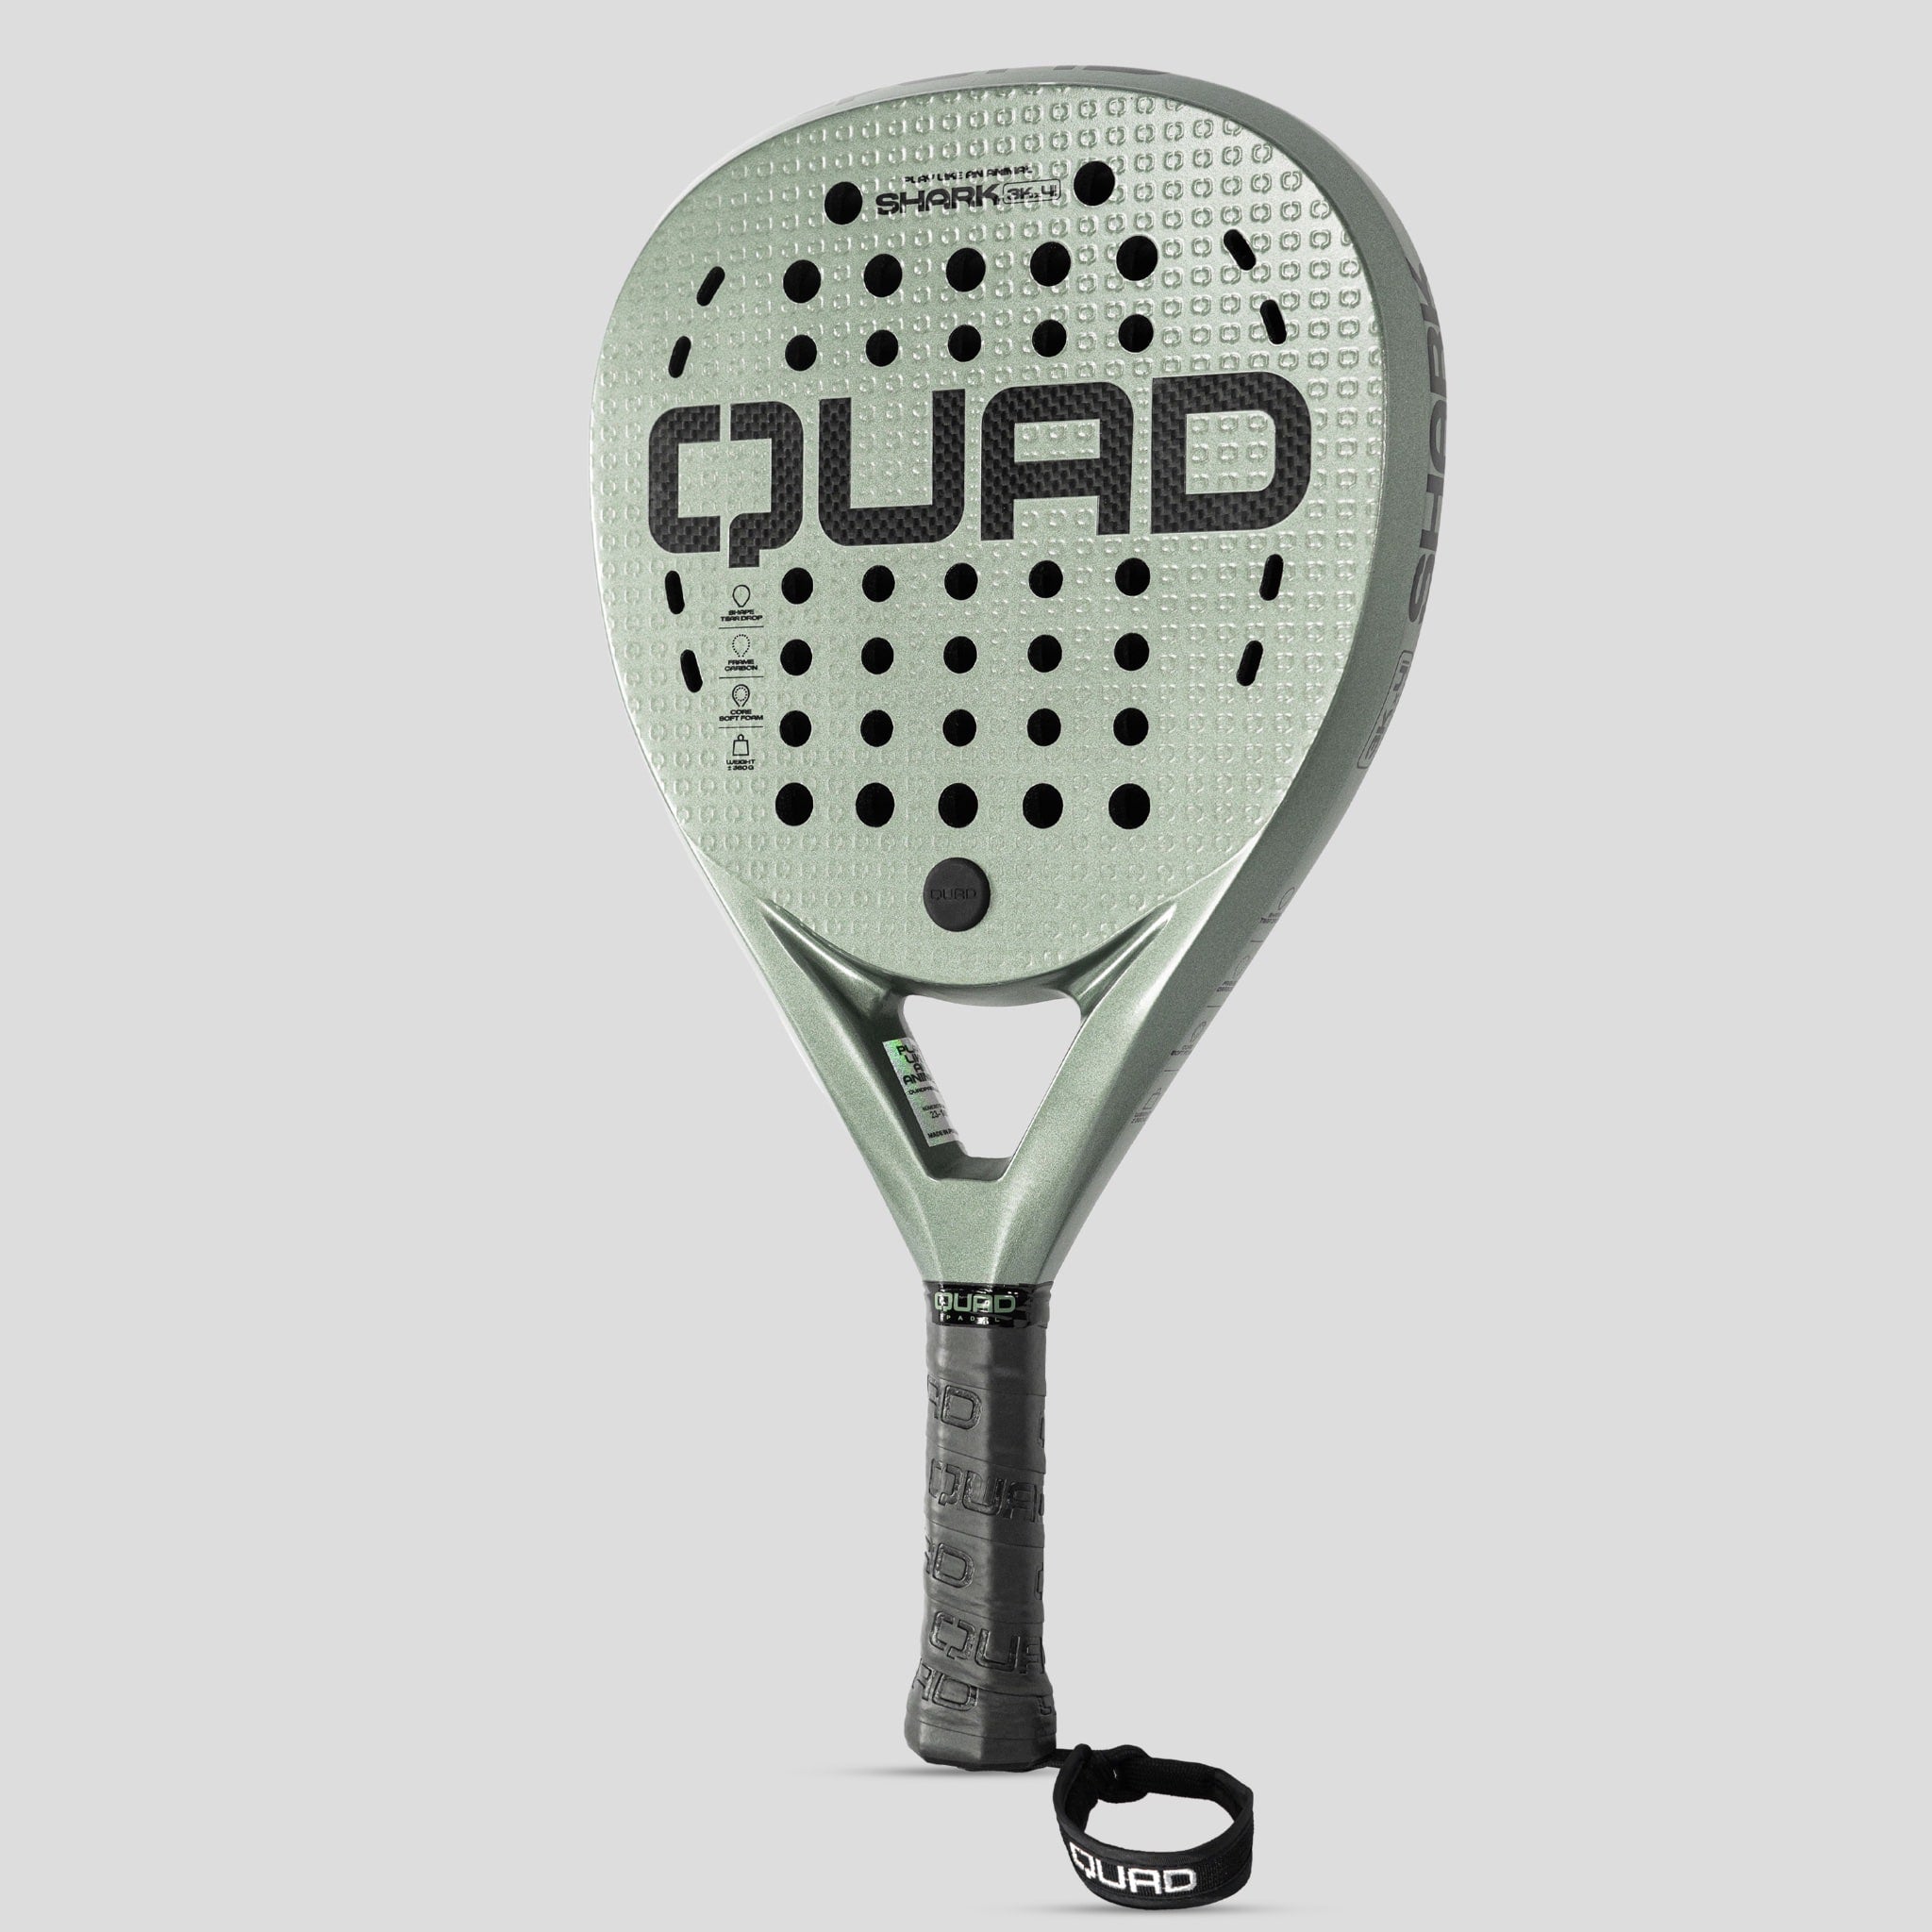 Quad Shark Racket right side view